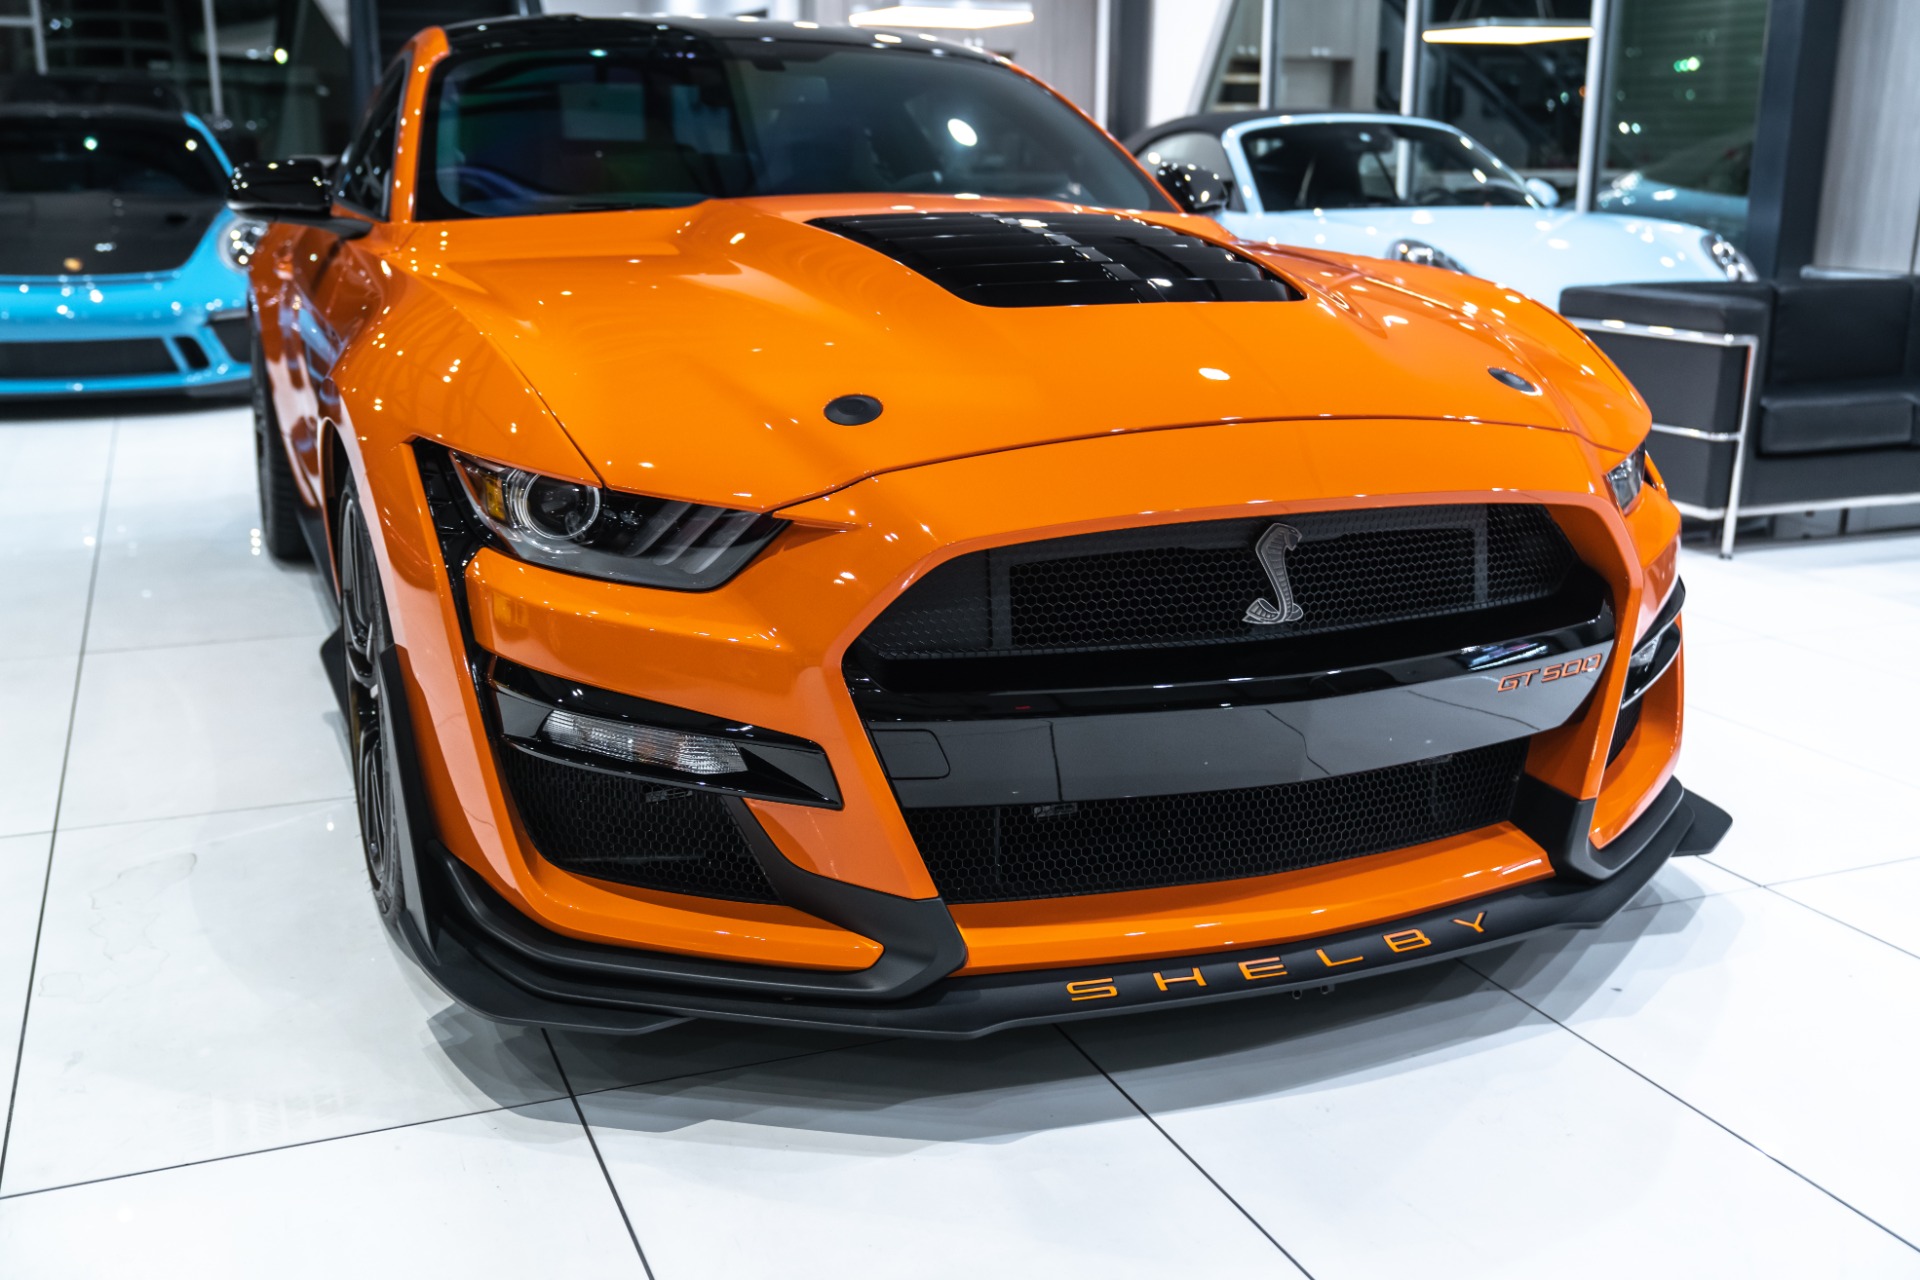 Used-2020-Ford-Mustang-Shelby-GT500-Coupe-Twister-Orange-Tech-Pkg-Handling-Pkg-Recaro-Seats